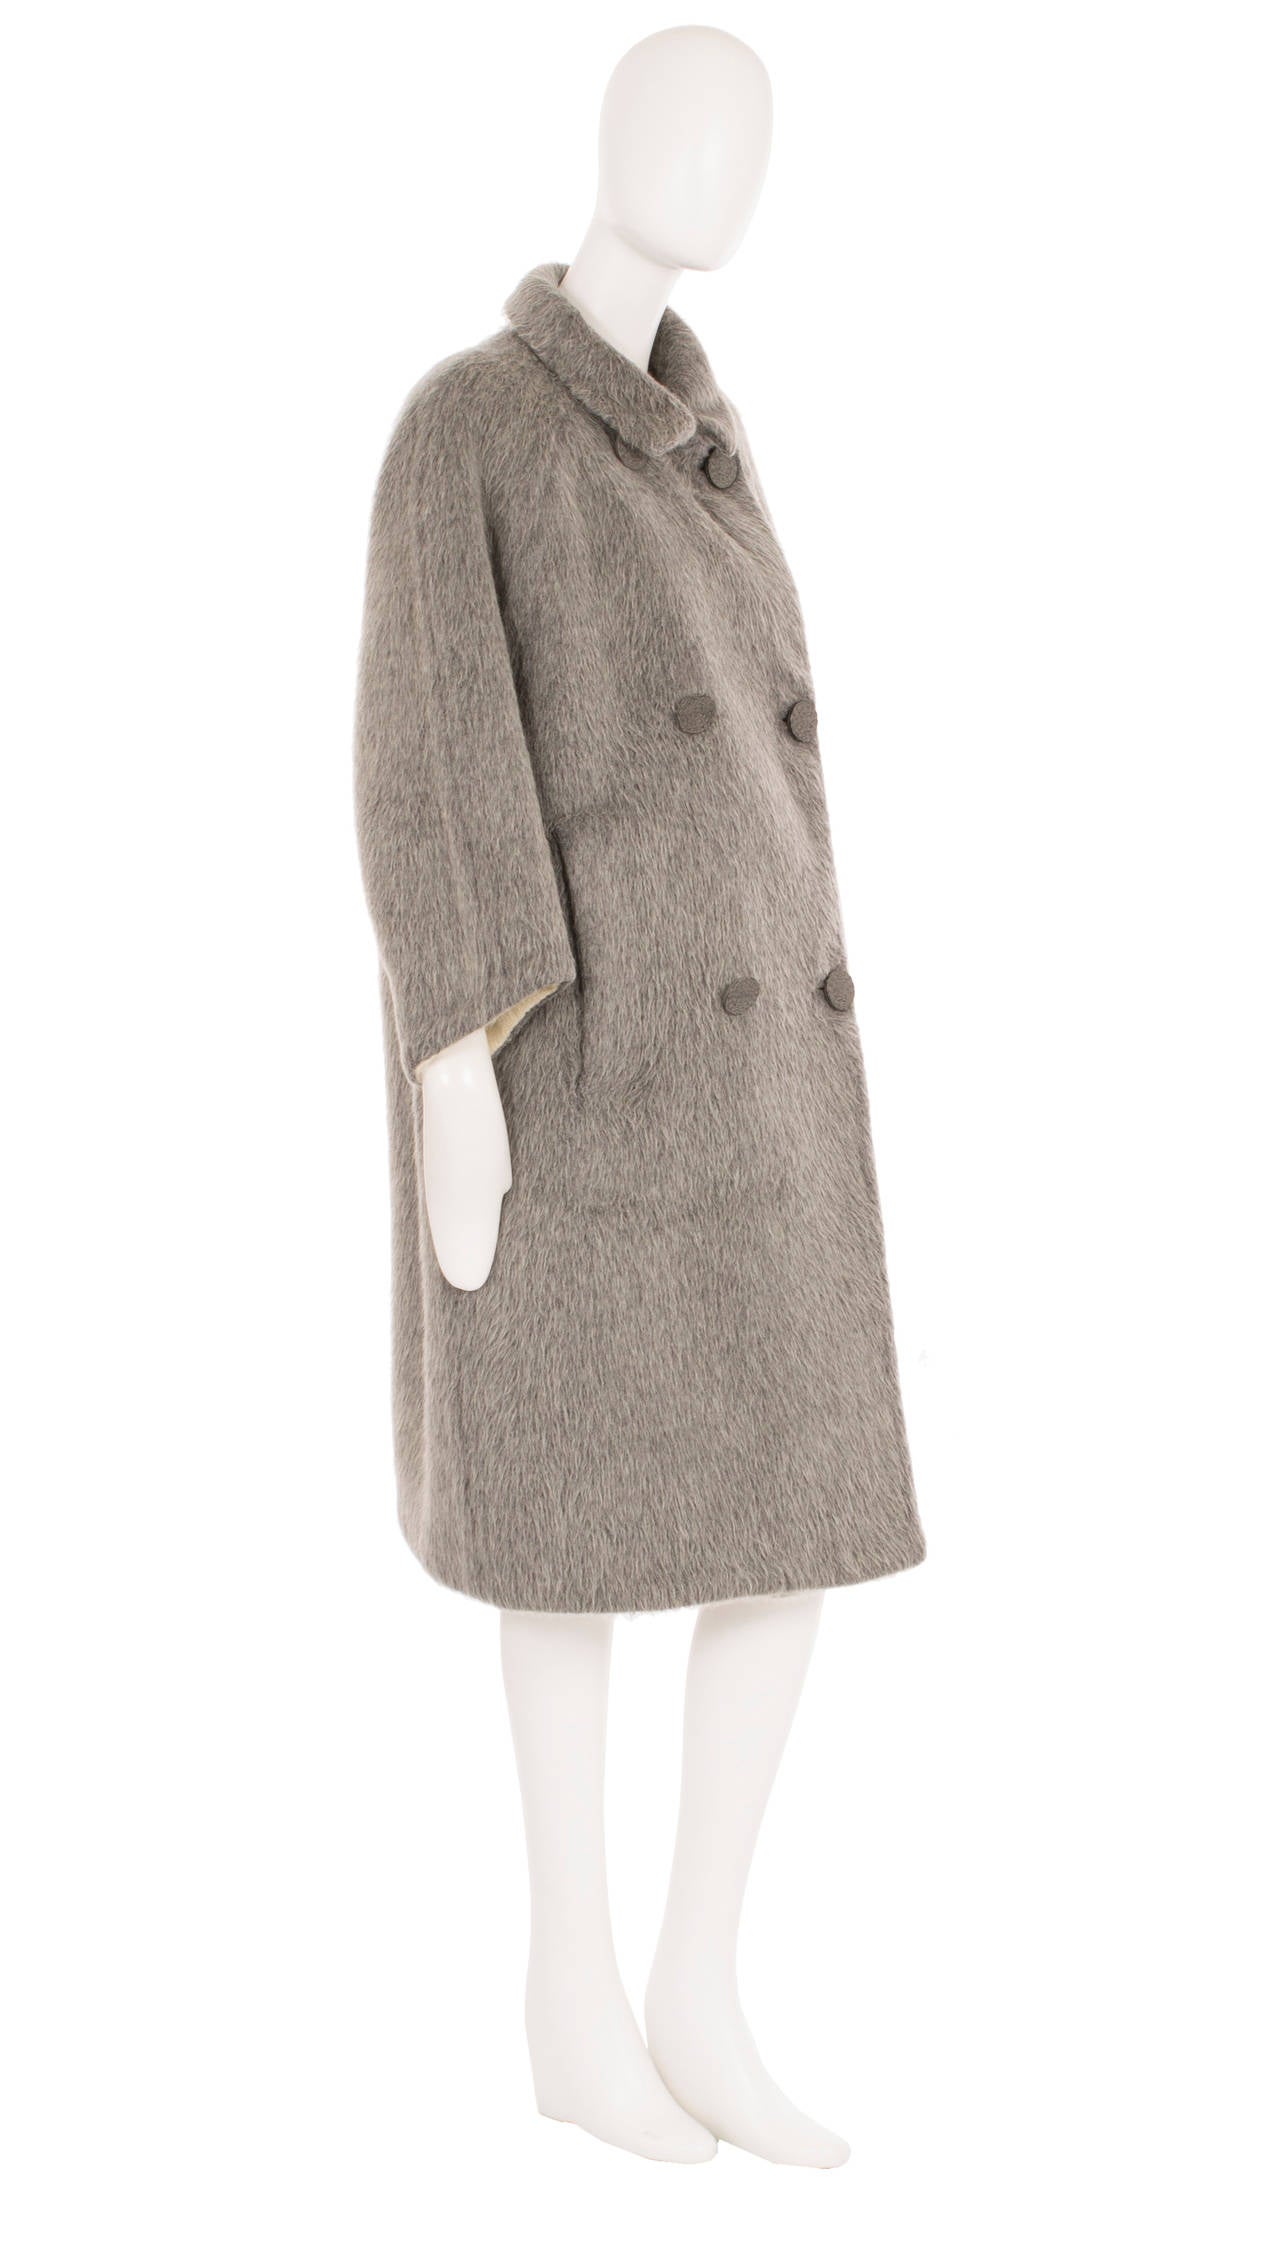 A fantastic example of one of Balenciaga’s most iconic silhouettes, this cocoon coat was designed for his Eisa label. Constructed in double-faced wool, the coat has an amazing texture and contrasts between the ivory inside and grey on the outside.